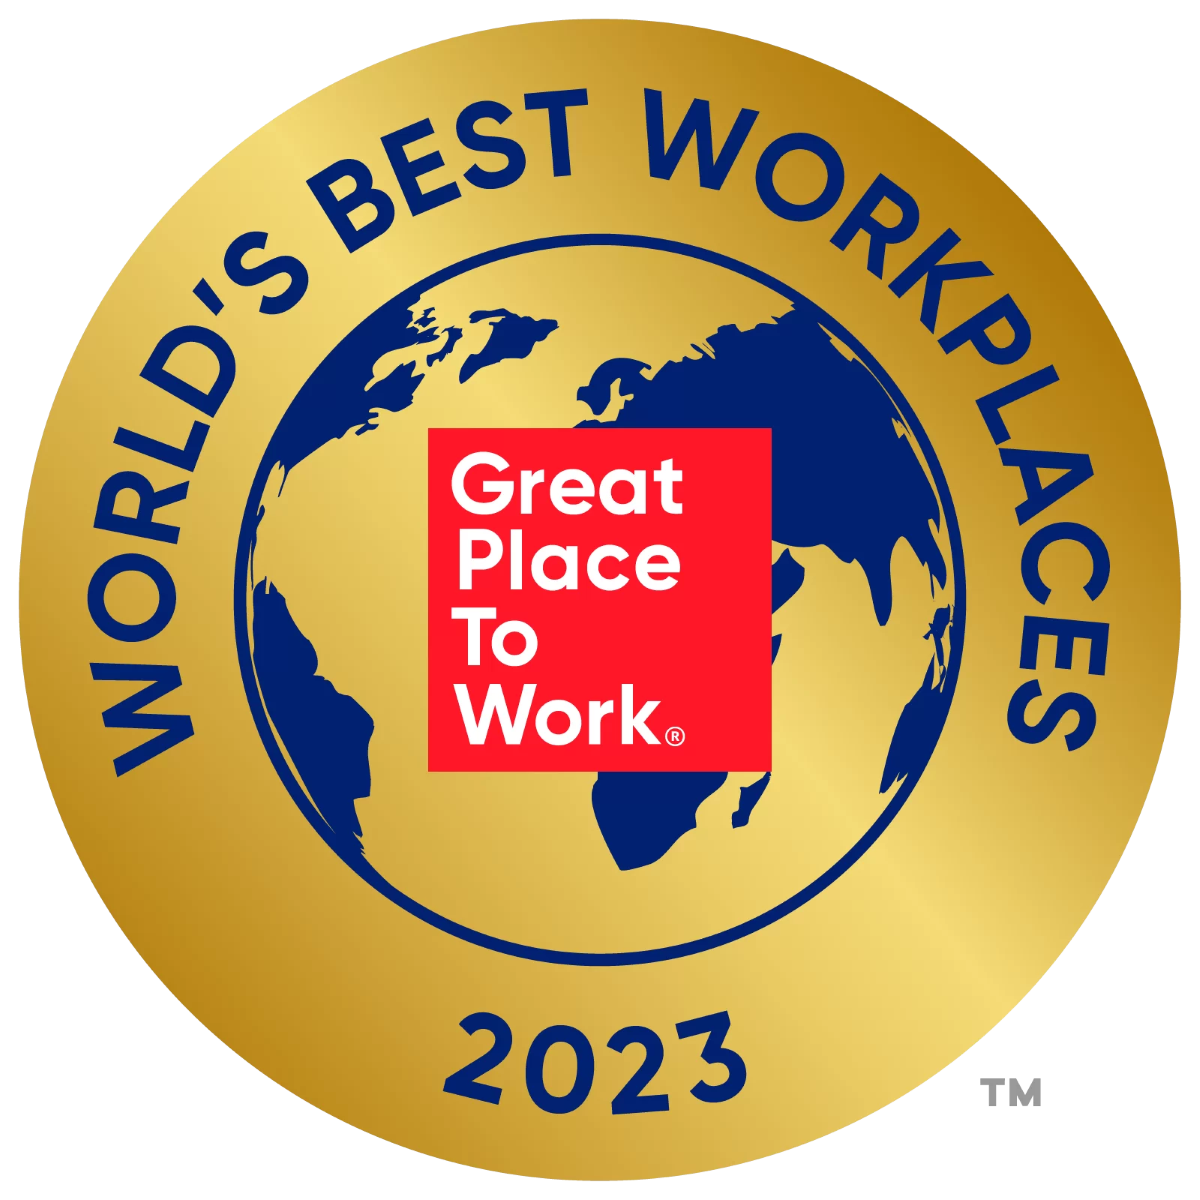 "World's Best Workplaces 2023" badge.